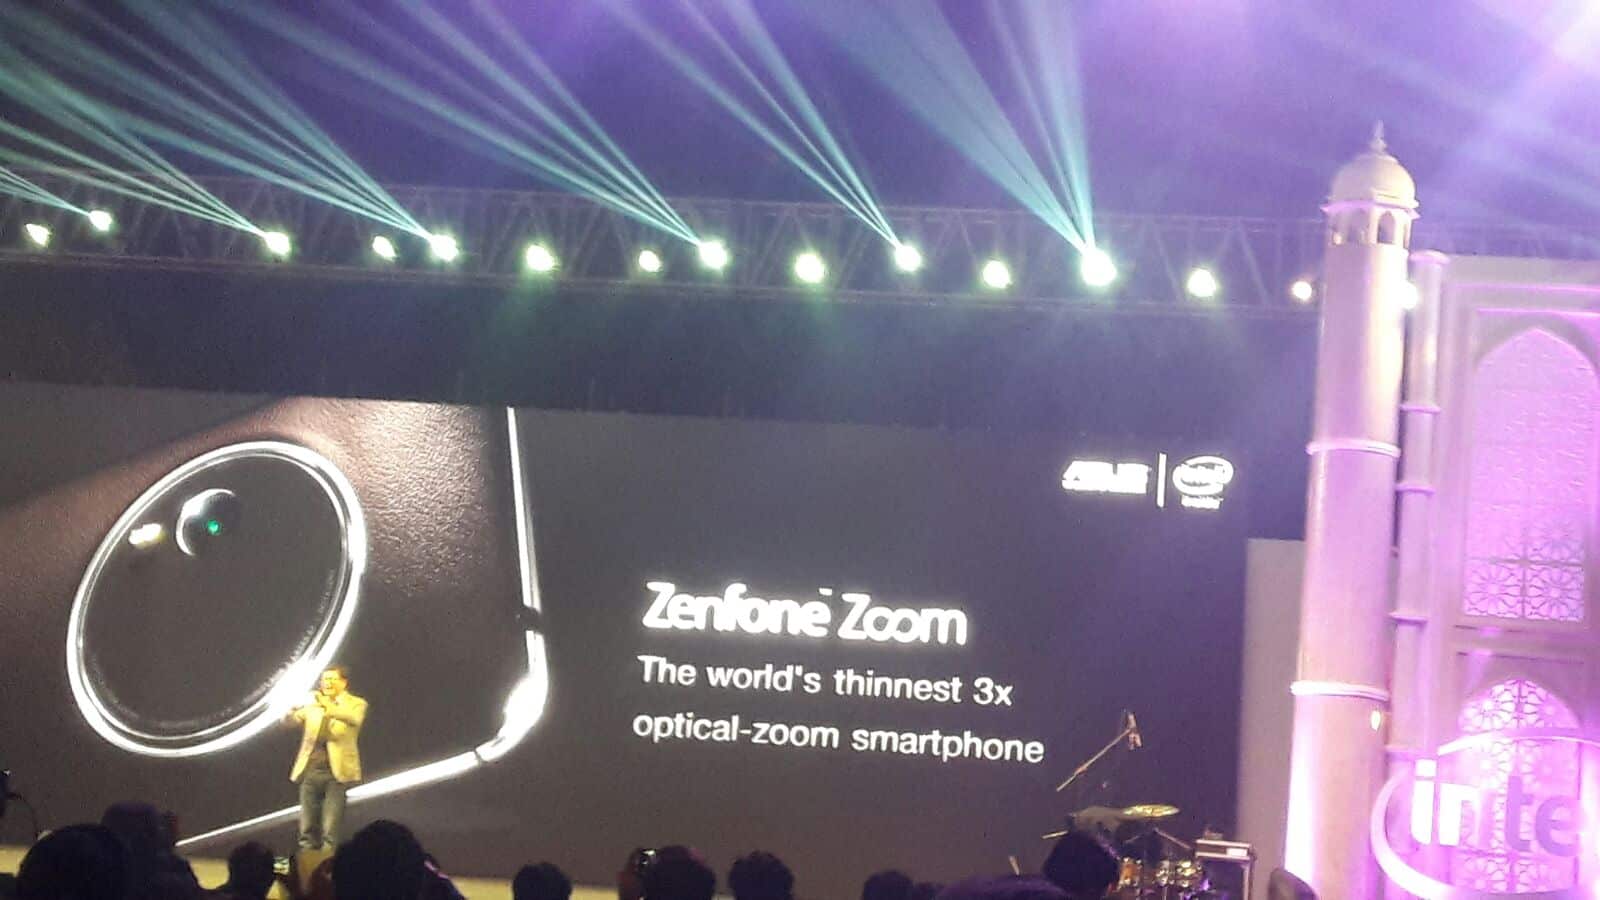 Asus ZenFone Zoom unveiled: This is the World's thinnest 3X Optical-Zoom smartphone - 14